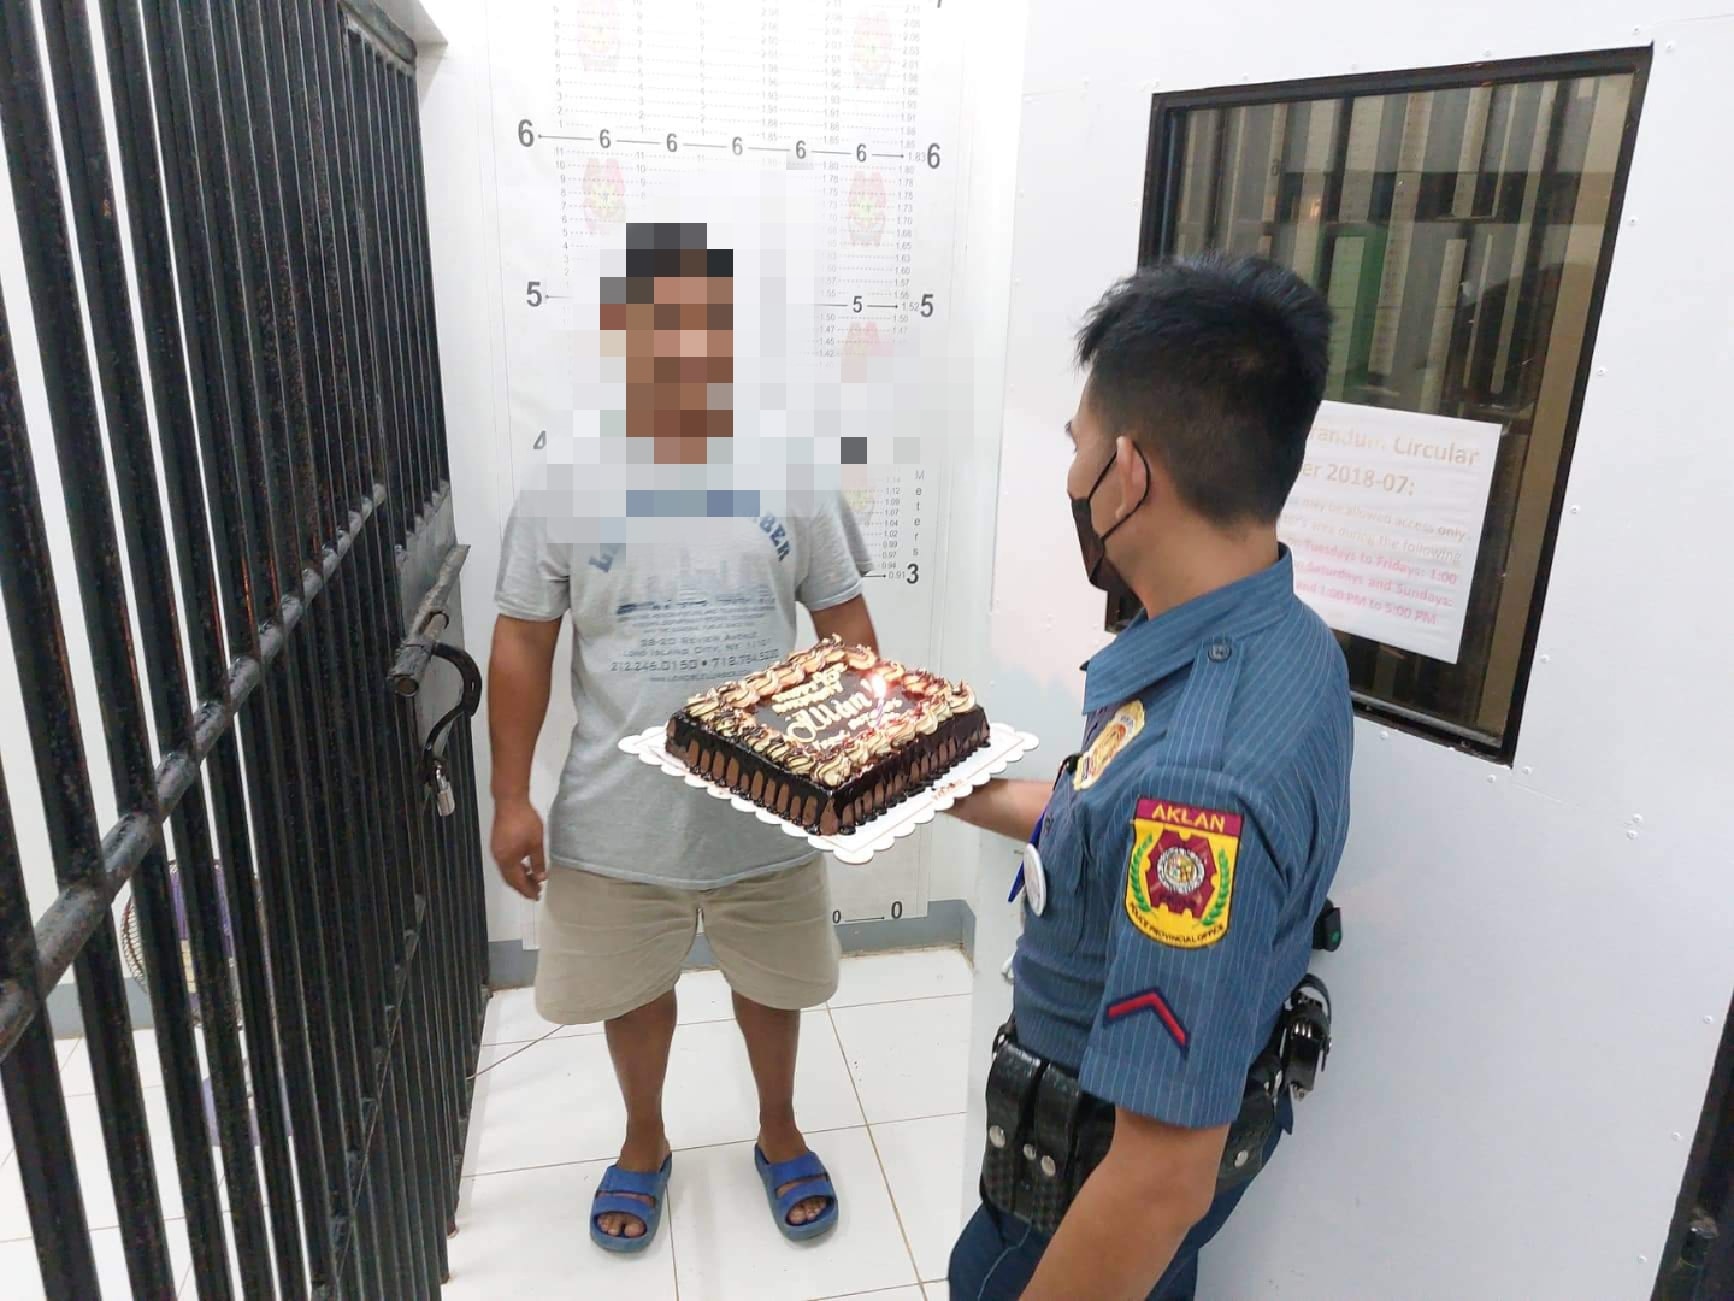 Suspect who was arrested on his birthday receives birthday cake surprise from police 01